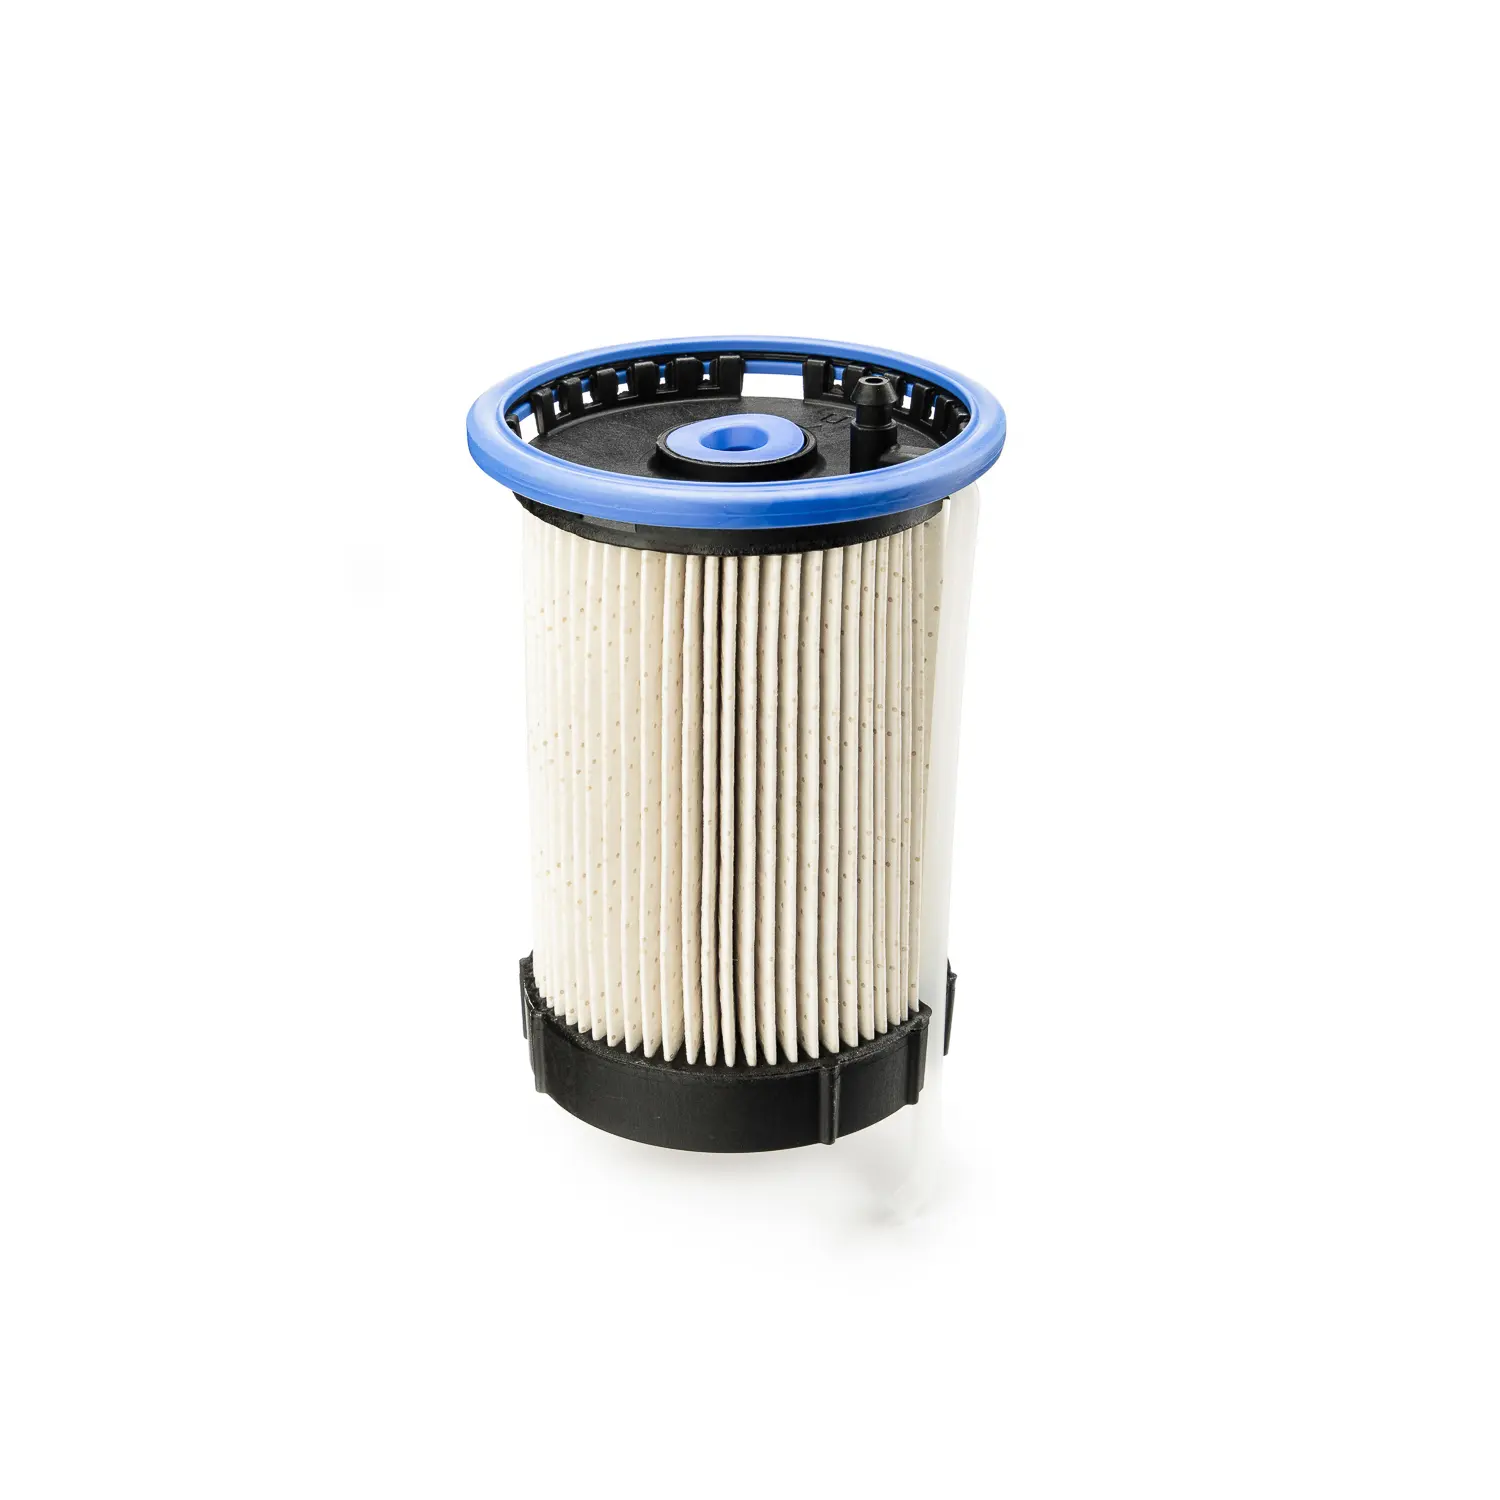 High-Performance UFI Filters Fuel Filter - Maximum Purity for Fuel 26.065.00 - For Uninterrupted Journeys